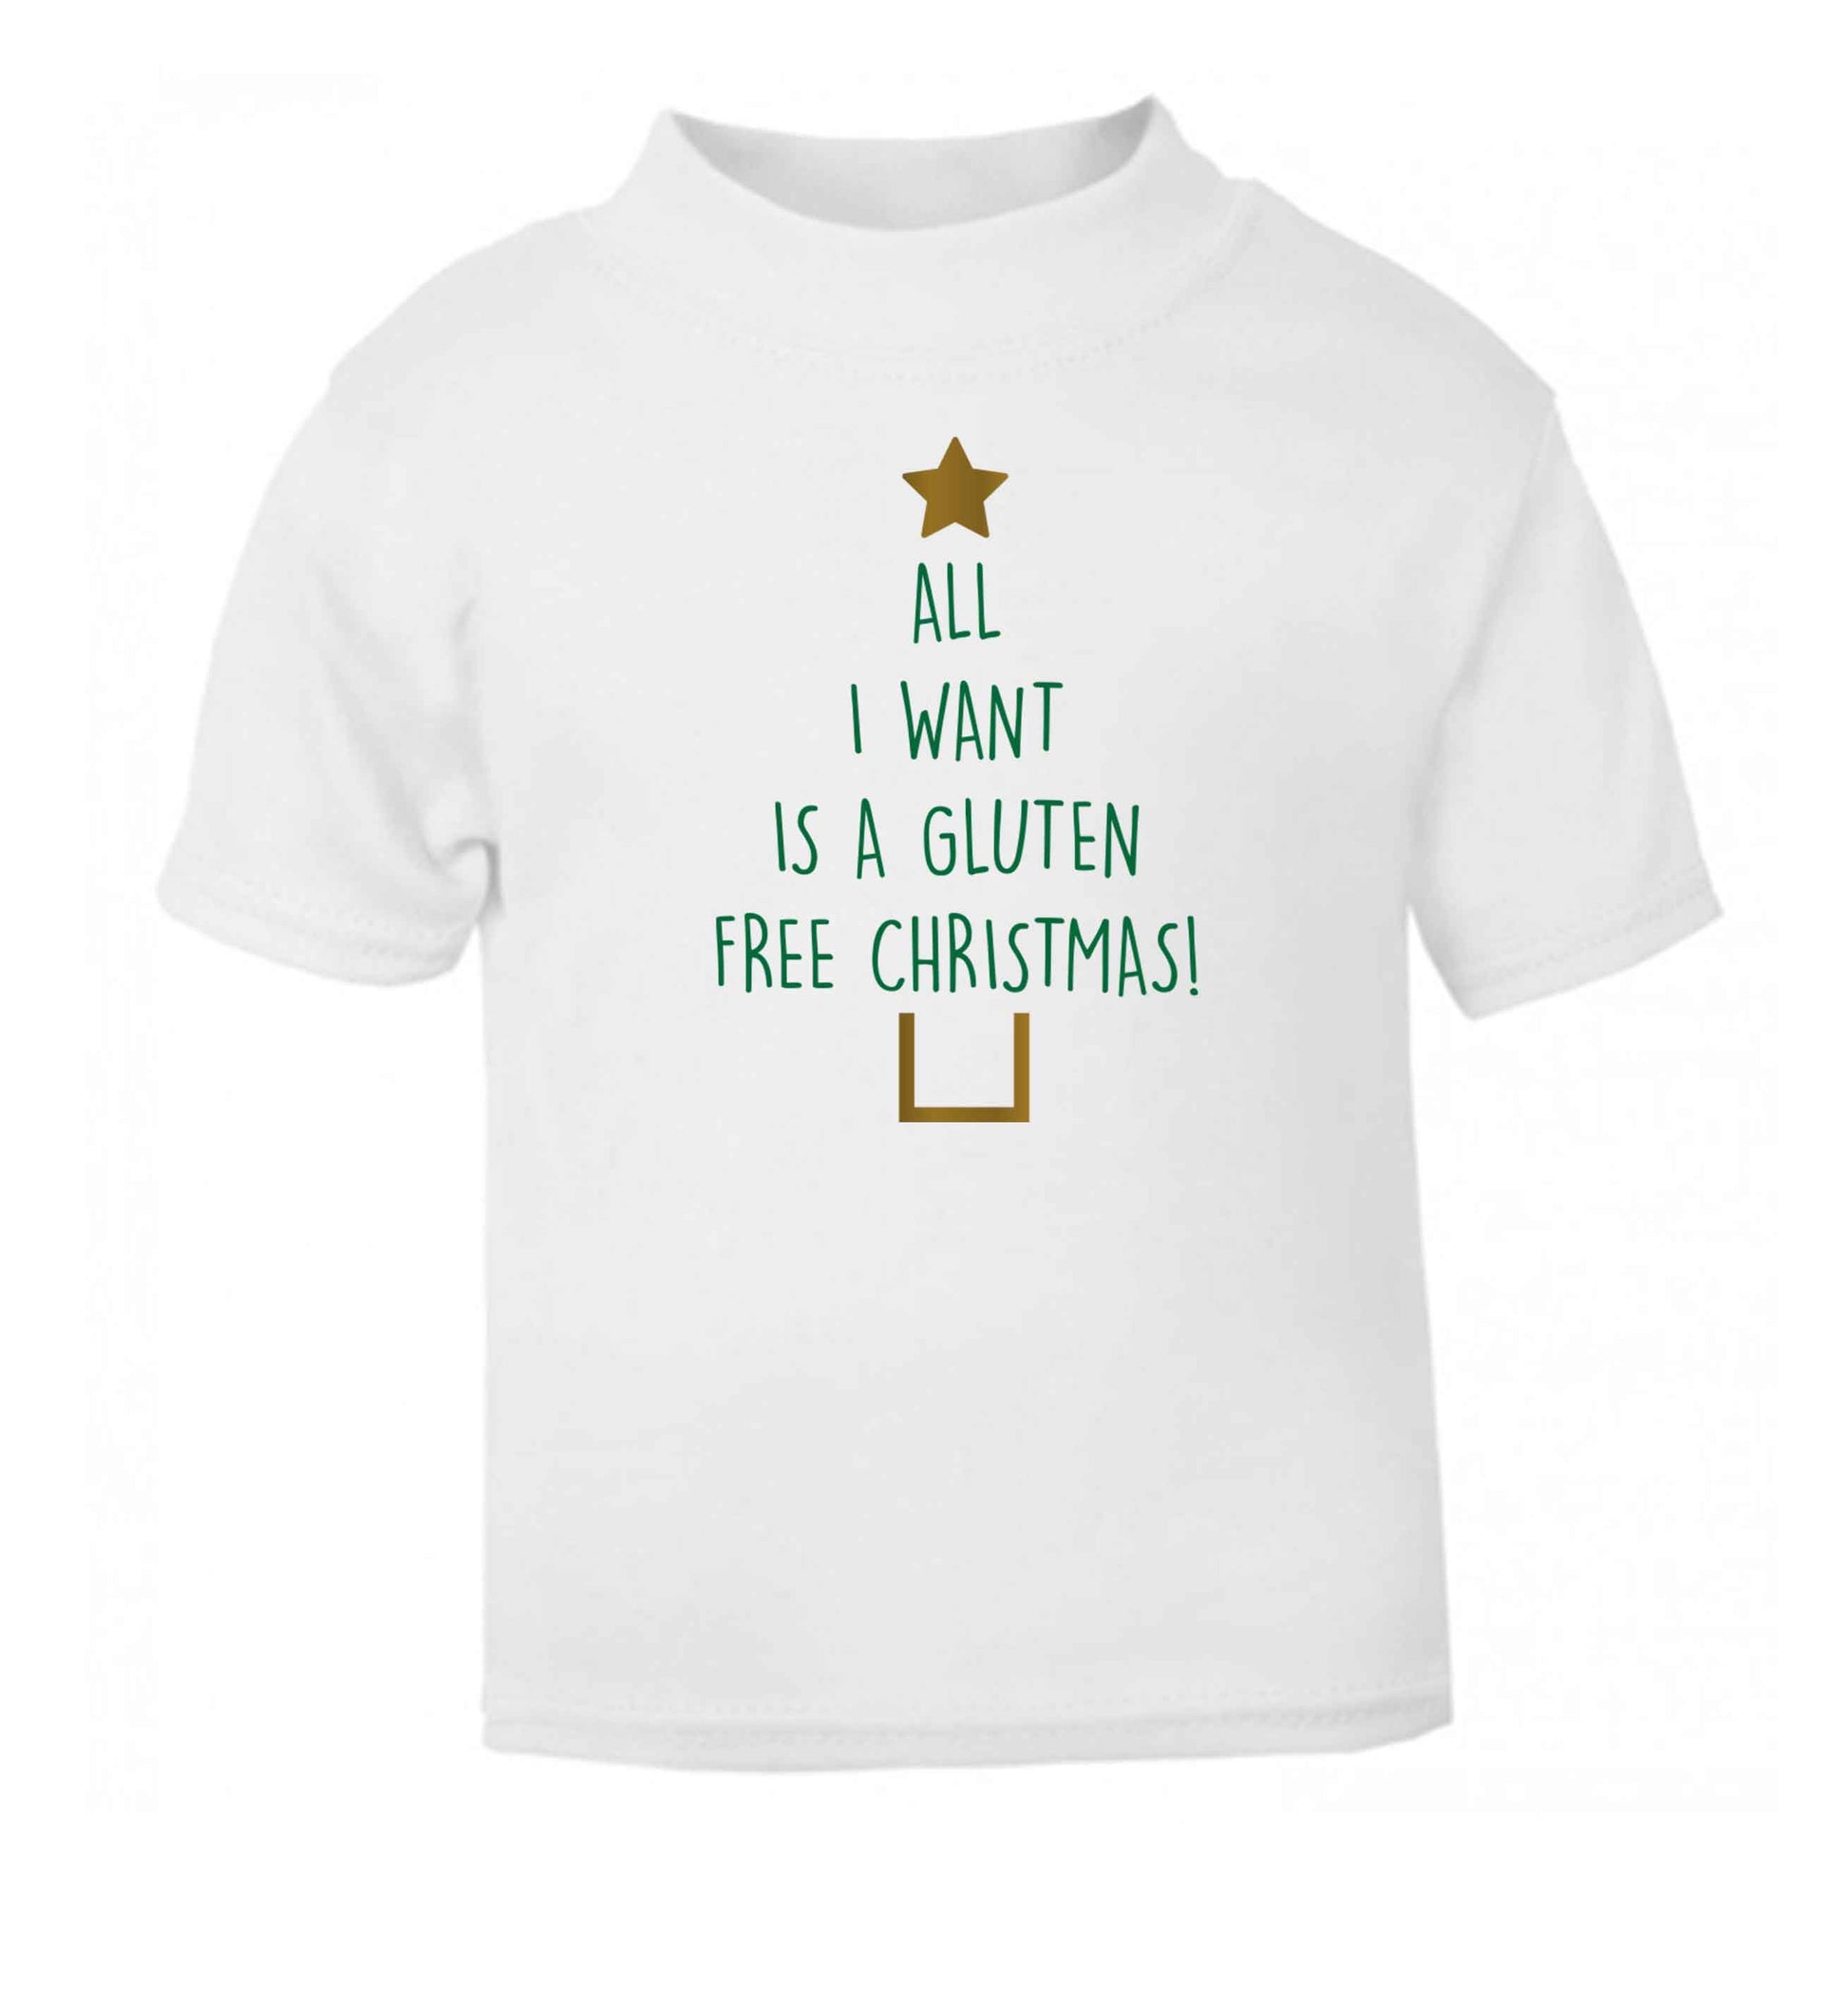 All I want is a gluten free Christmas white Baby Toddler Tshirt 2 Years